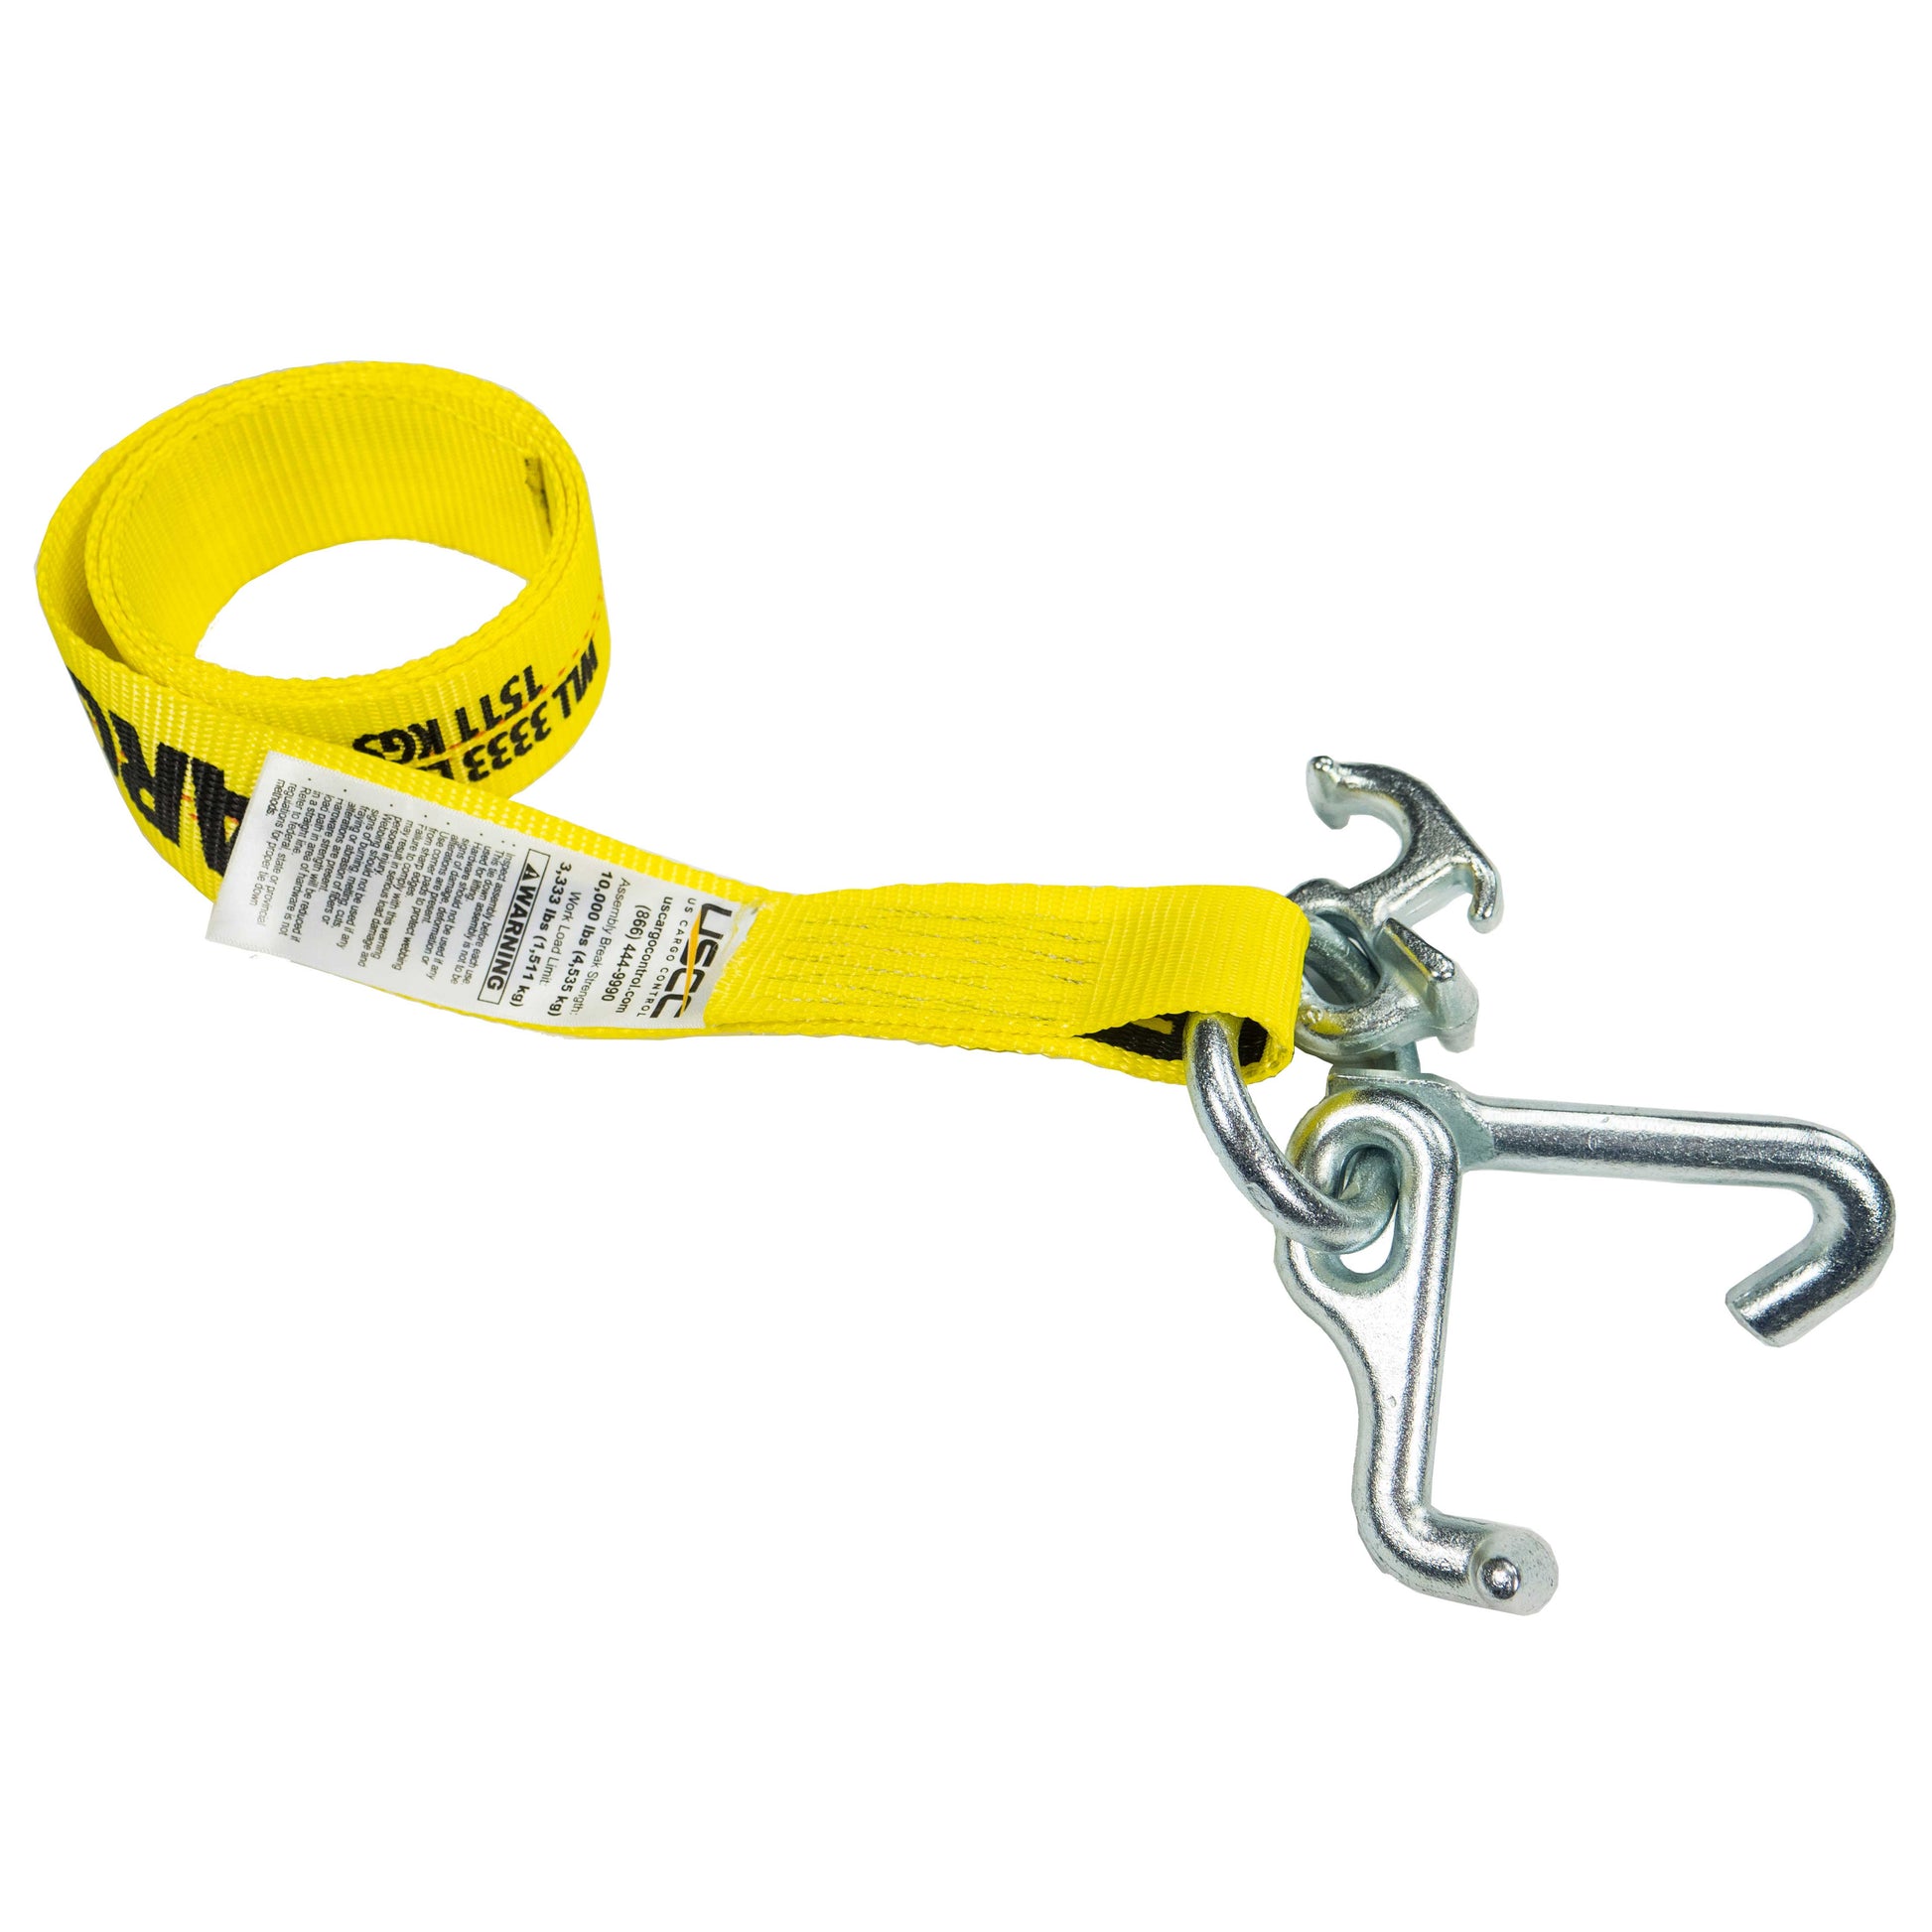 2 inch x 6 foot Replacement Strap with RTJ Cluster Hook image 1 of 8